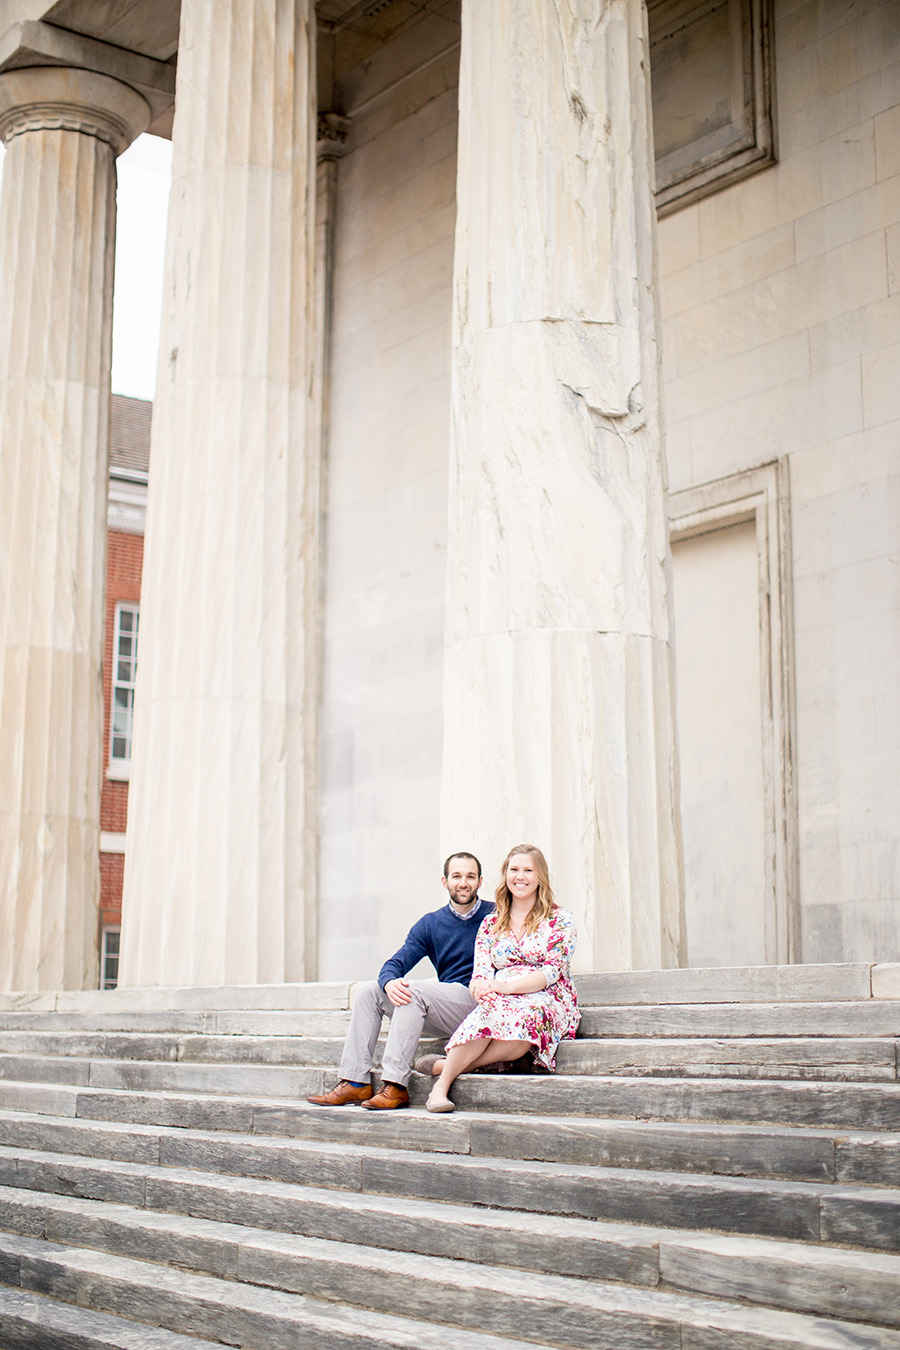 engaged pair sits on steps together